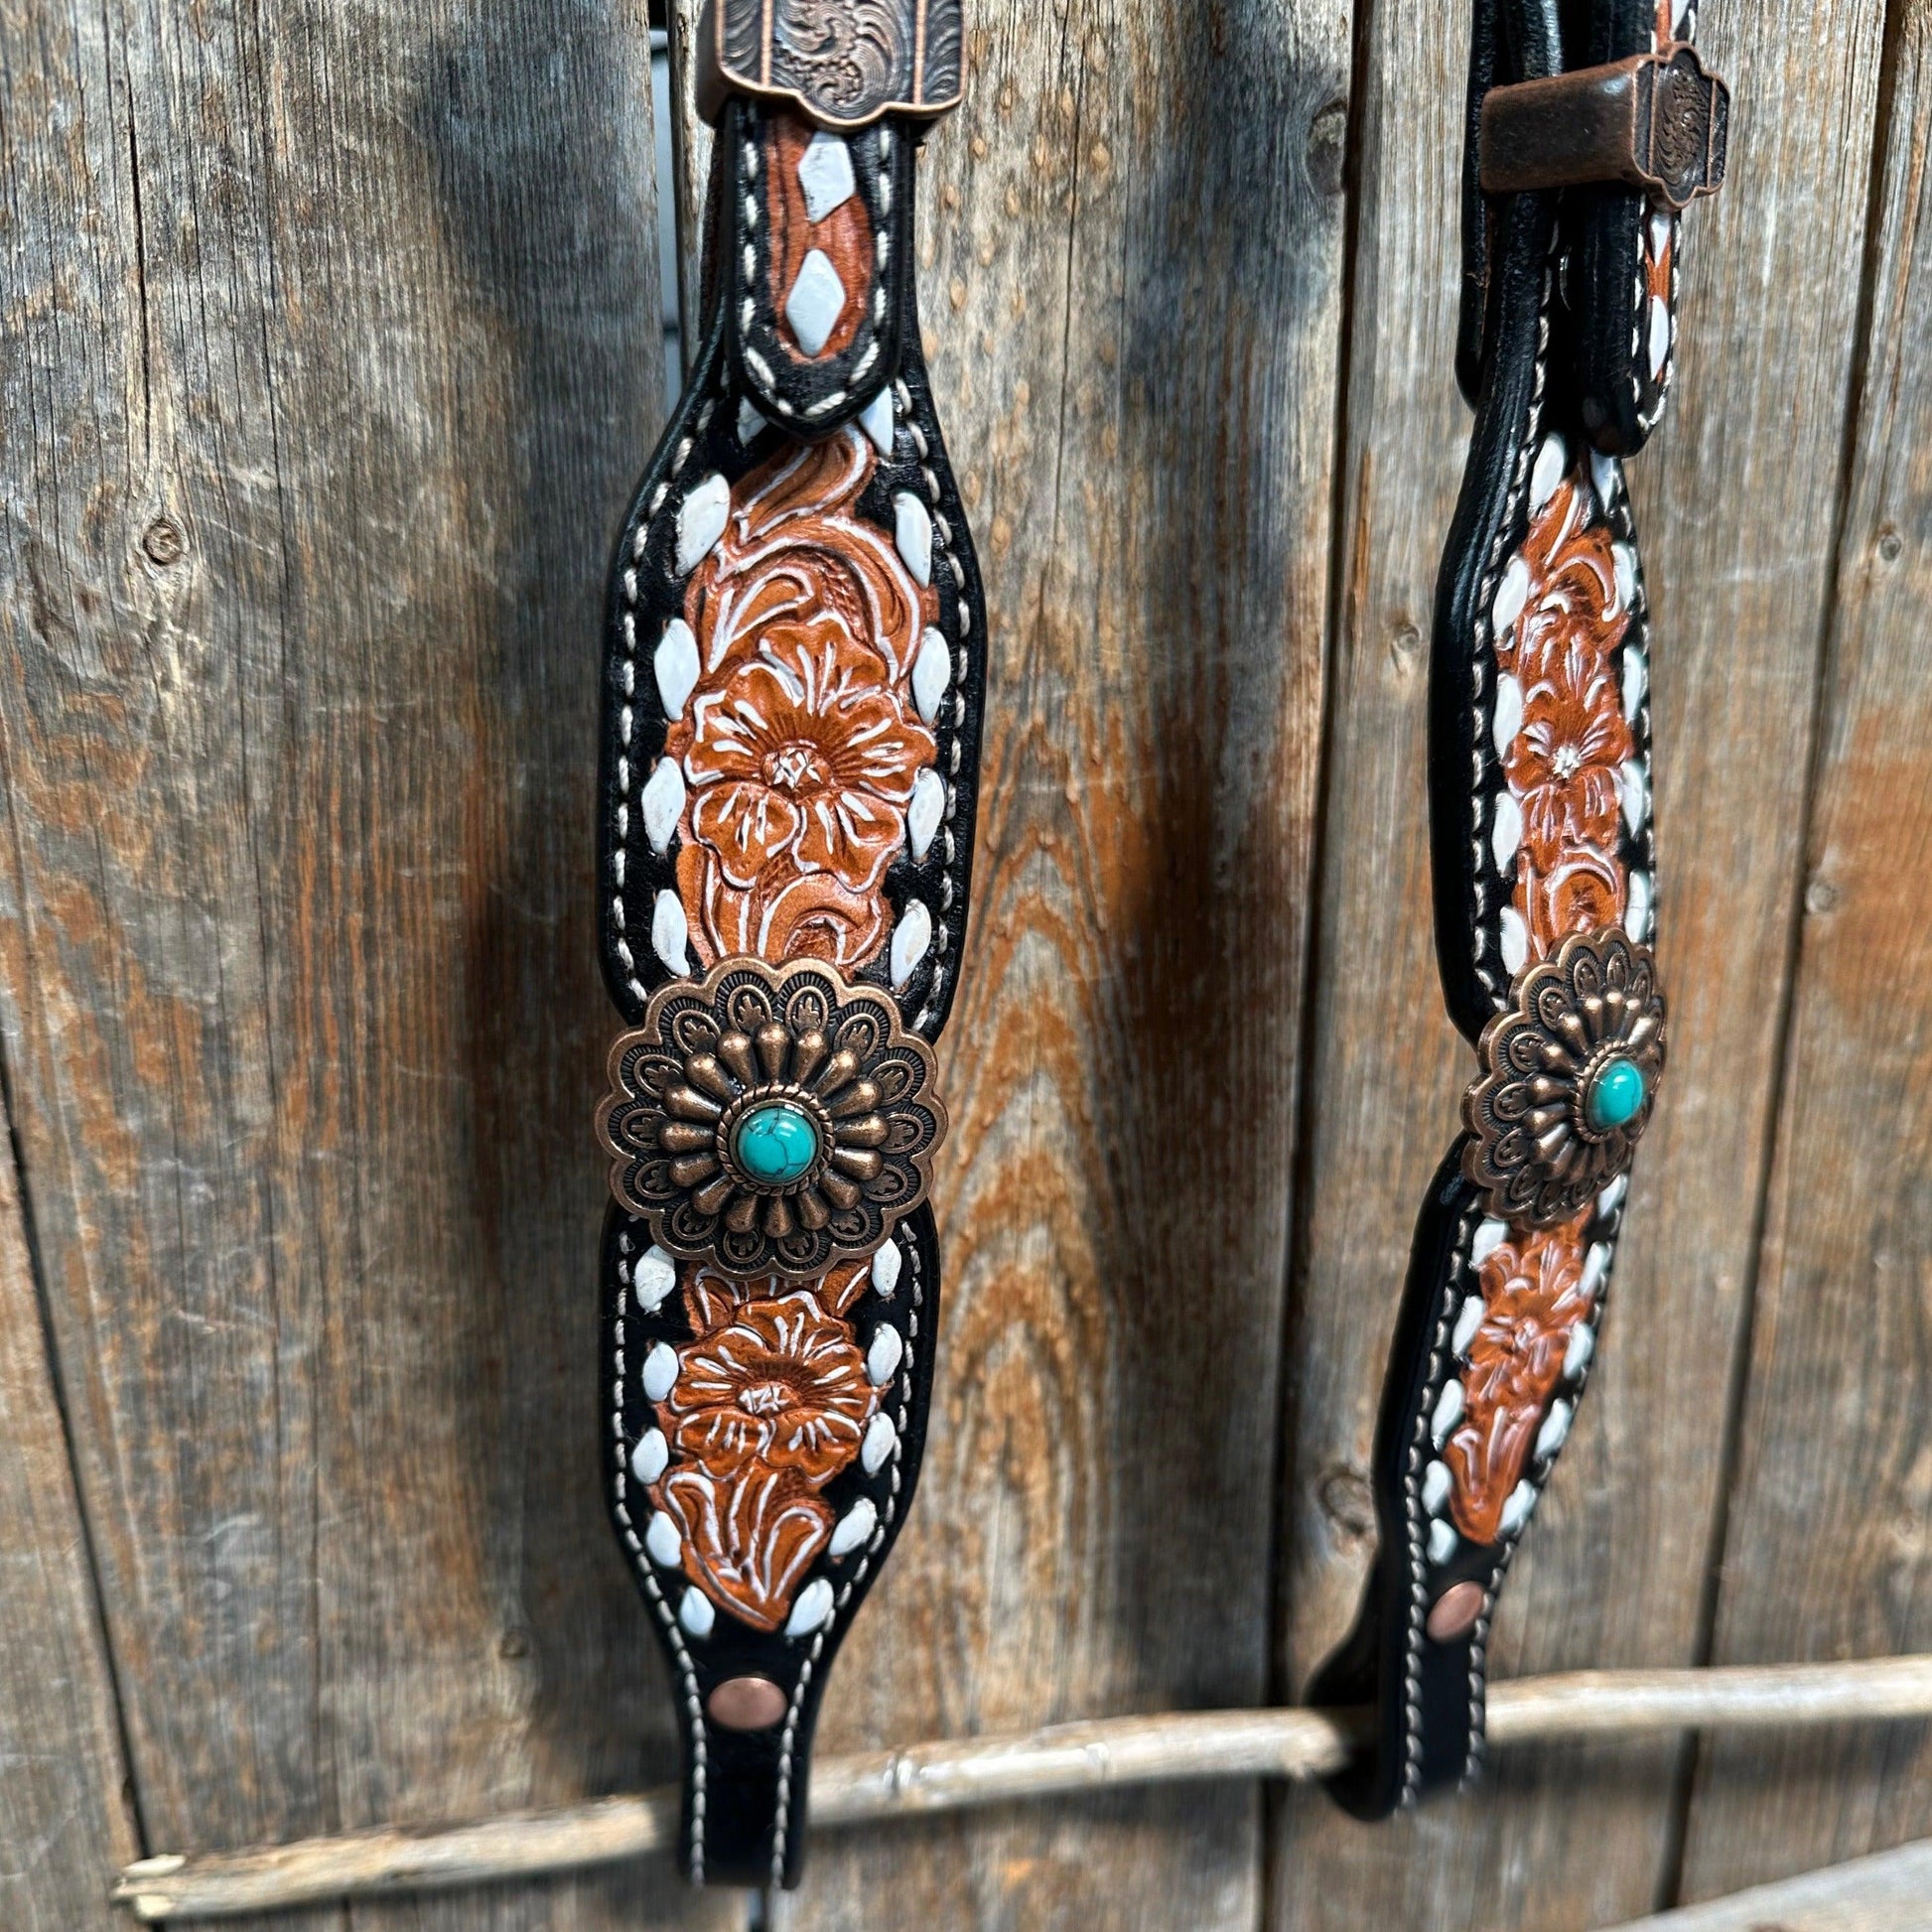 Classic Copper and Turquoise One Ear / Breastcollar #OEBC528 - RODEO DRIVE